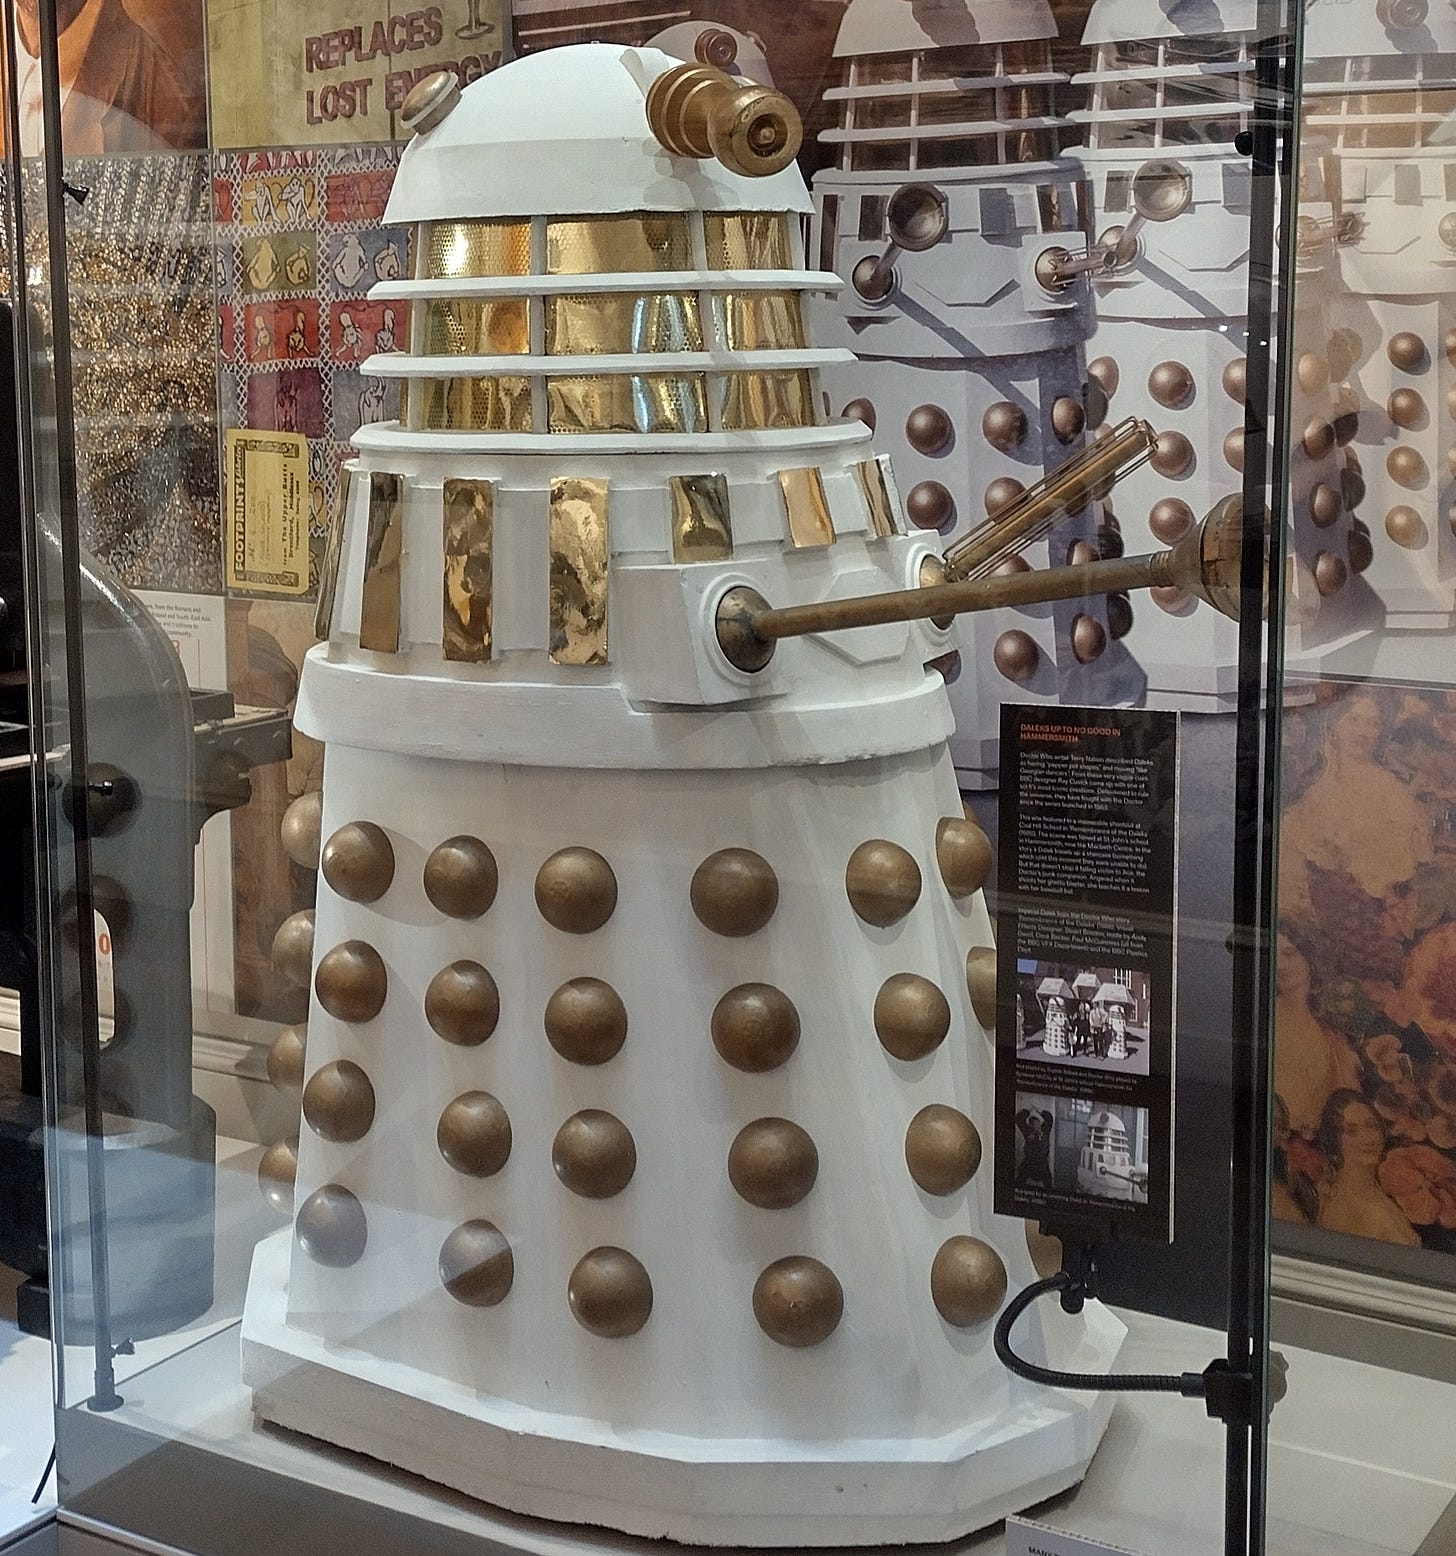 A full-sized Imperial Dalek prop from Remembrance of the Daleks